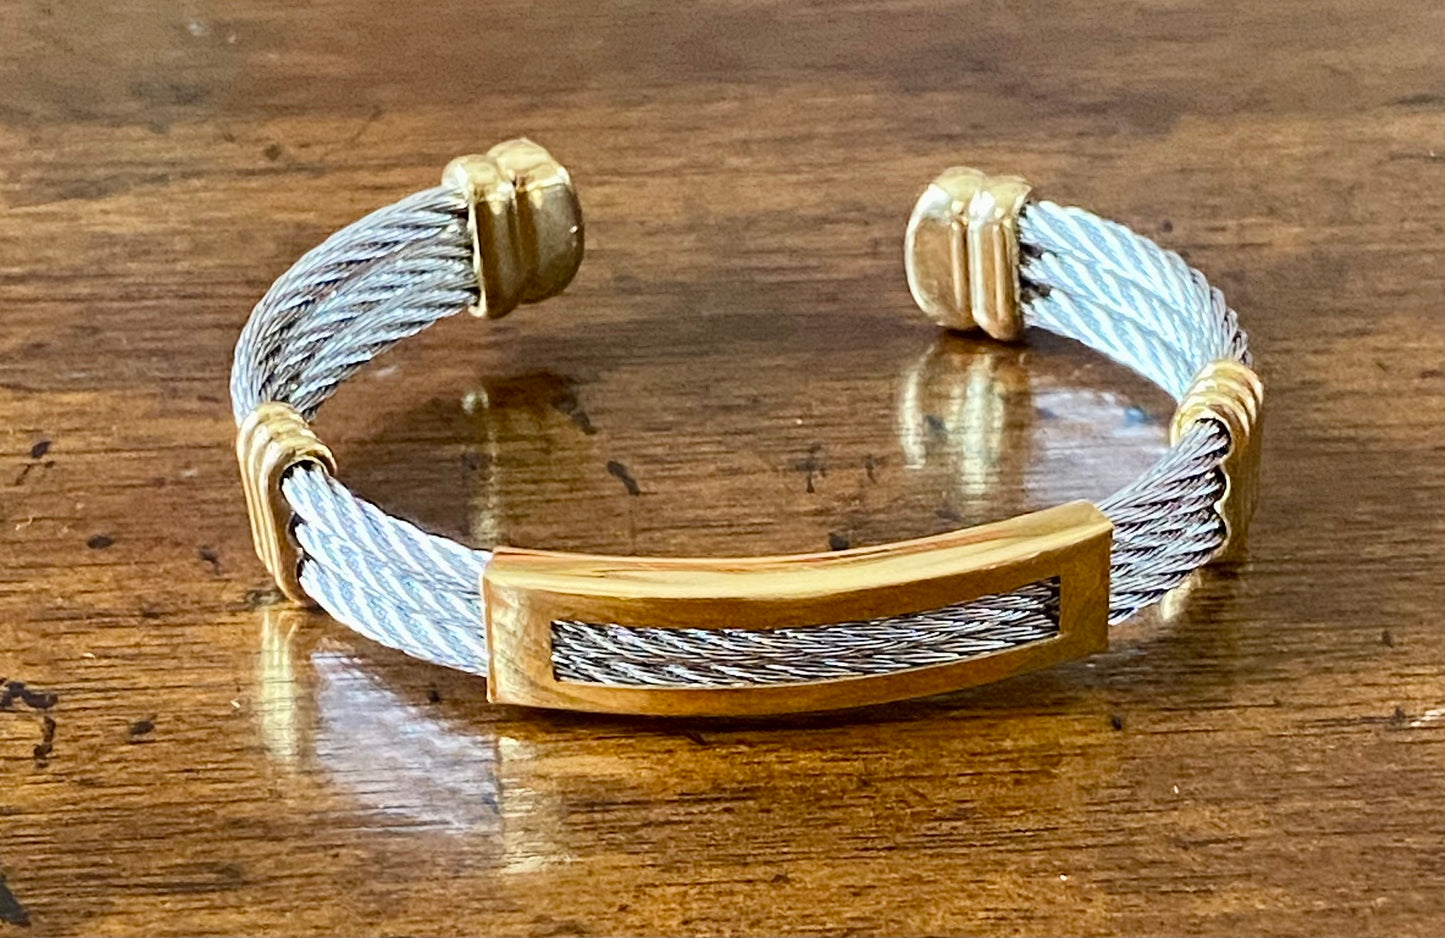 Ladies' Gold and Stainless Steel Twisted Cable Cuff